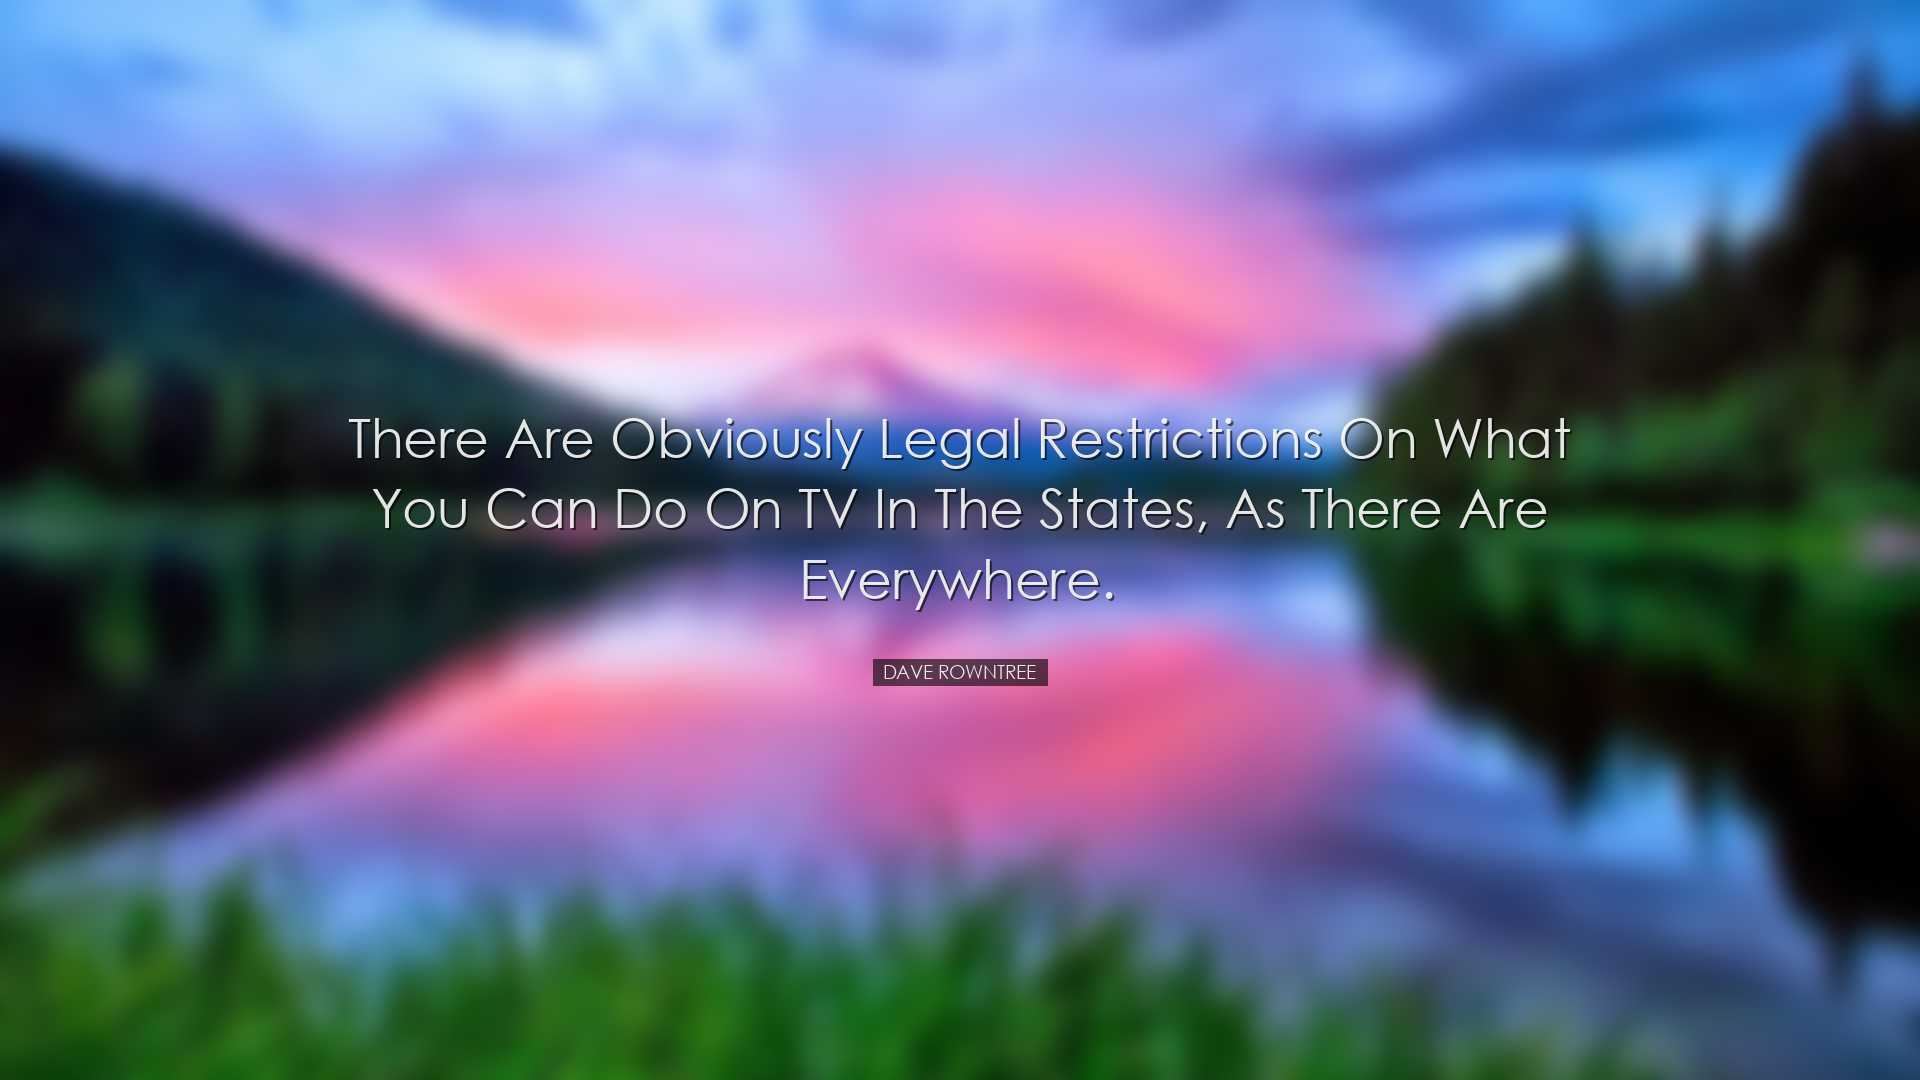 There are obviously legal restrictions on what you can do on TV in